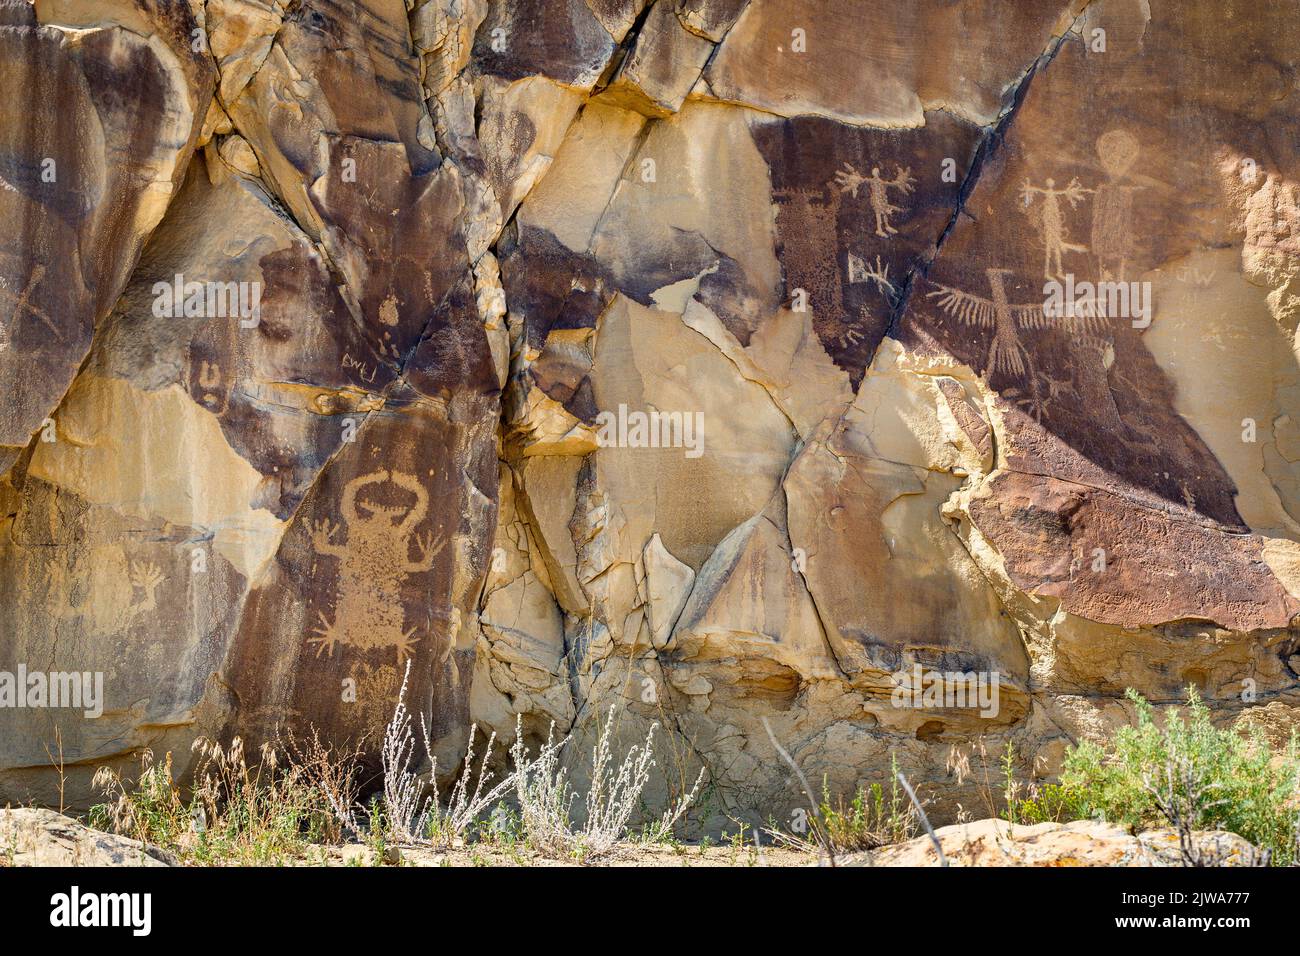 Petroglyphs rock art in Legend Rock State Archaeological Site, Wyoming - Carved sandstone panels with anthropomorphic and zoomorphic figures created b Stock Photo